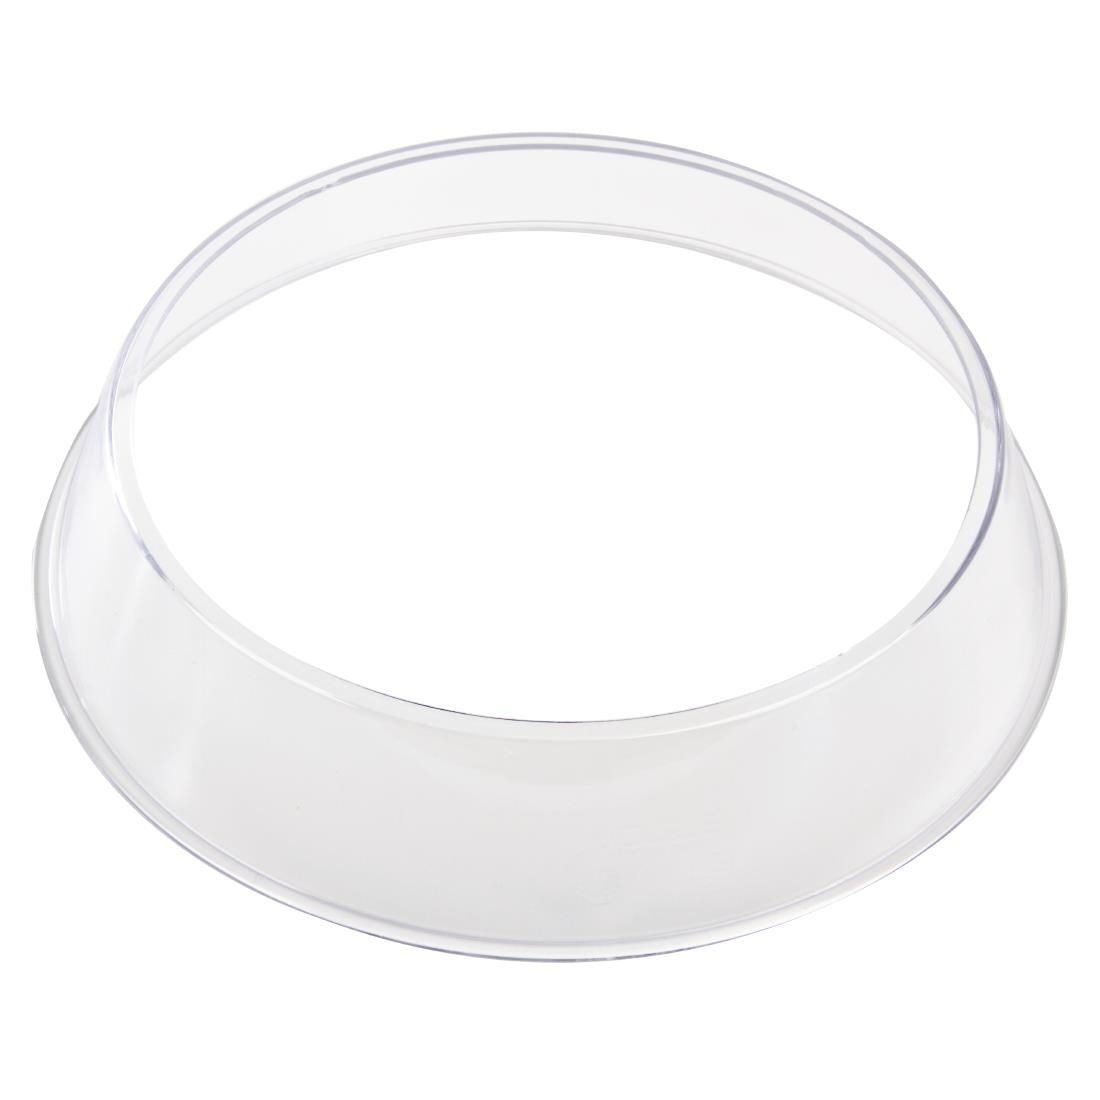 K481 Vogue Polycarbonate Plate Ring JD Catering Equipment Solutions Ltd